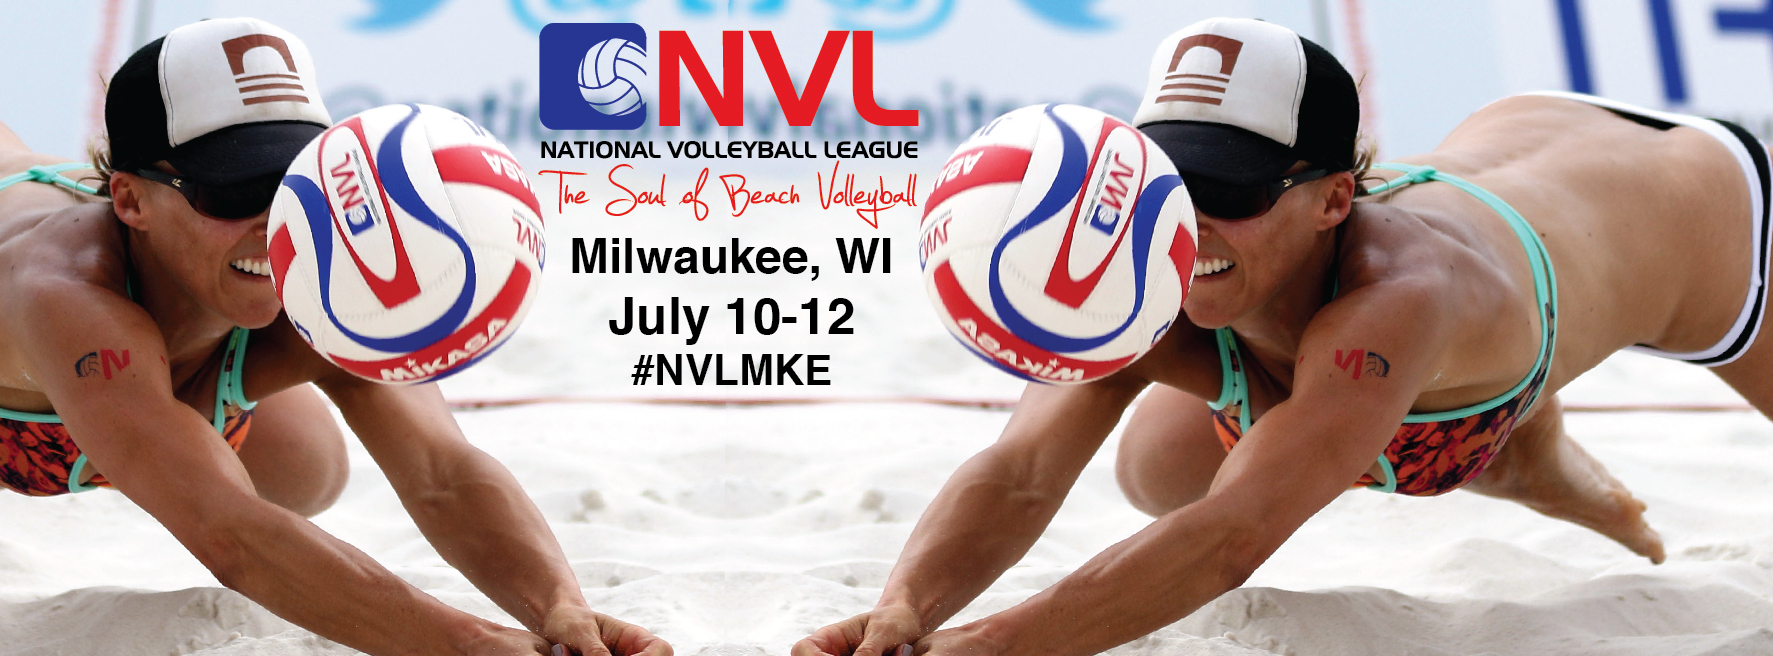 National Volleyball League Returns to Milwaukee for Pro Beach Volleyball Tournament from July 10-12